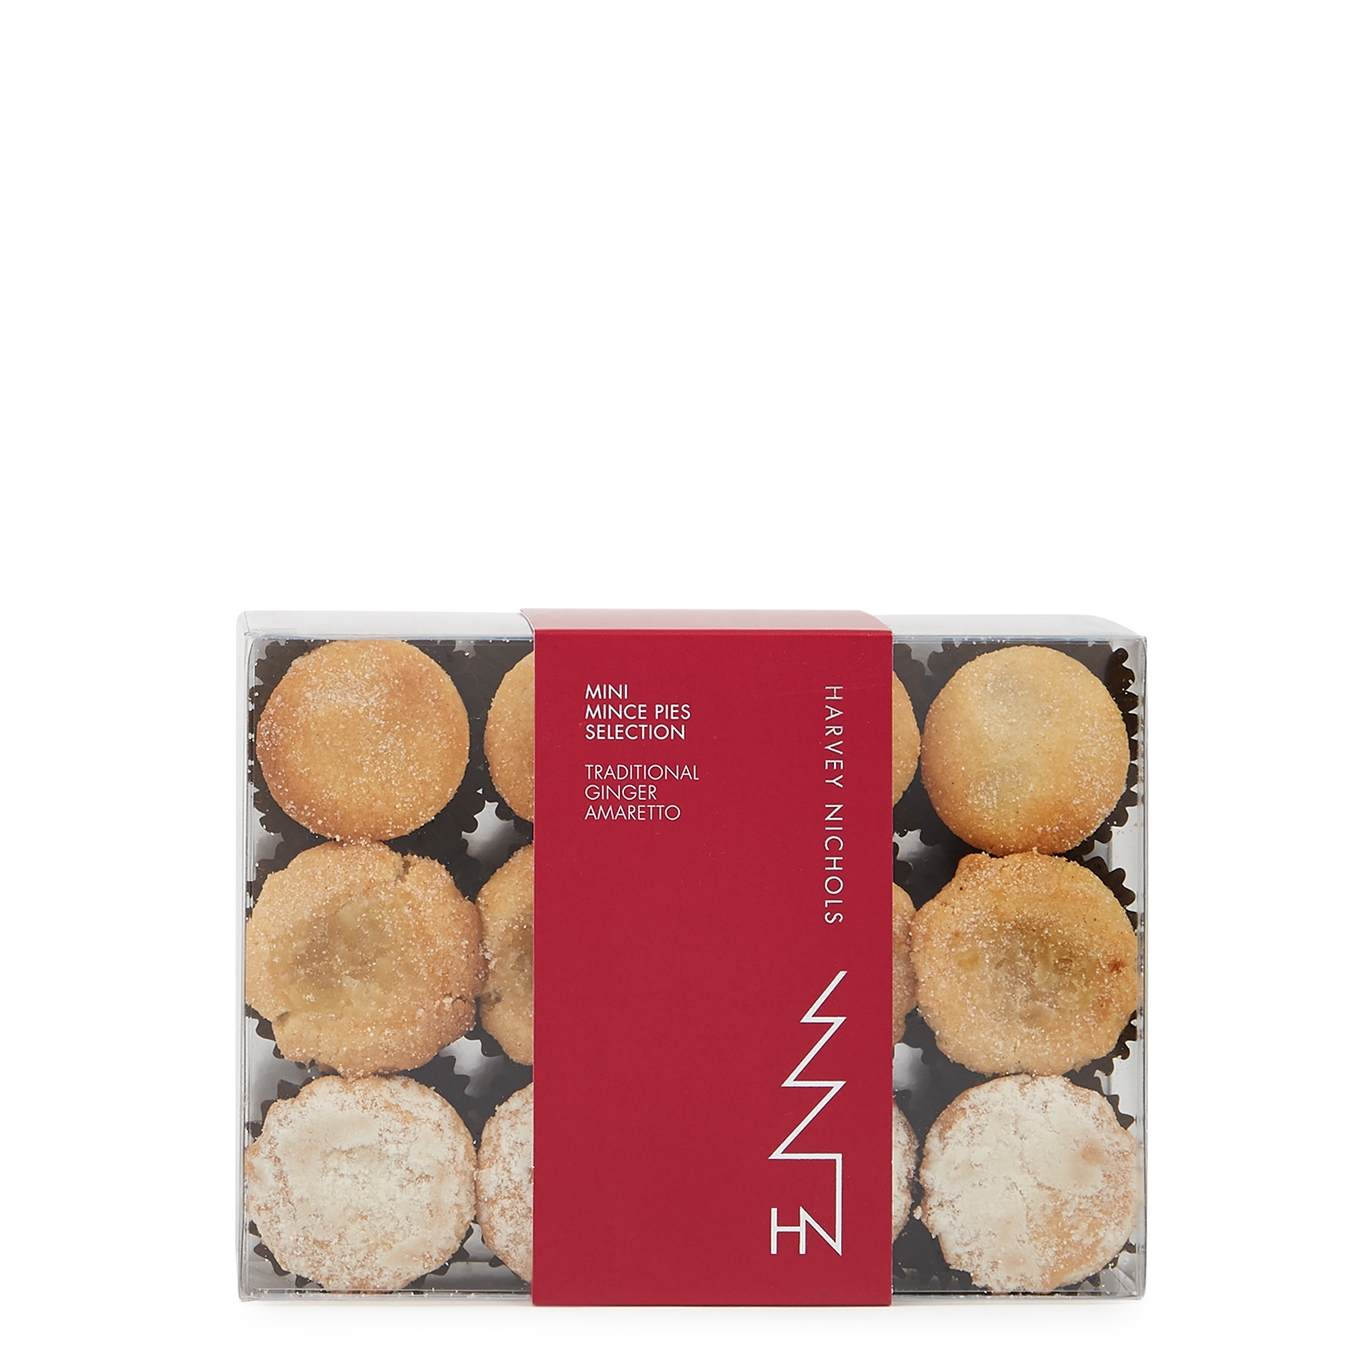 Harvey Nichols 12 Mini Traditional, Ginger & Amaretto Mince Pies Selection 210g